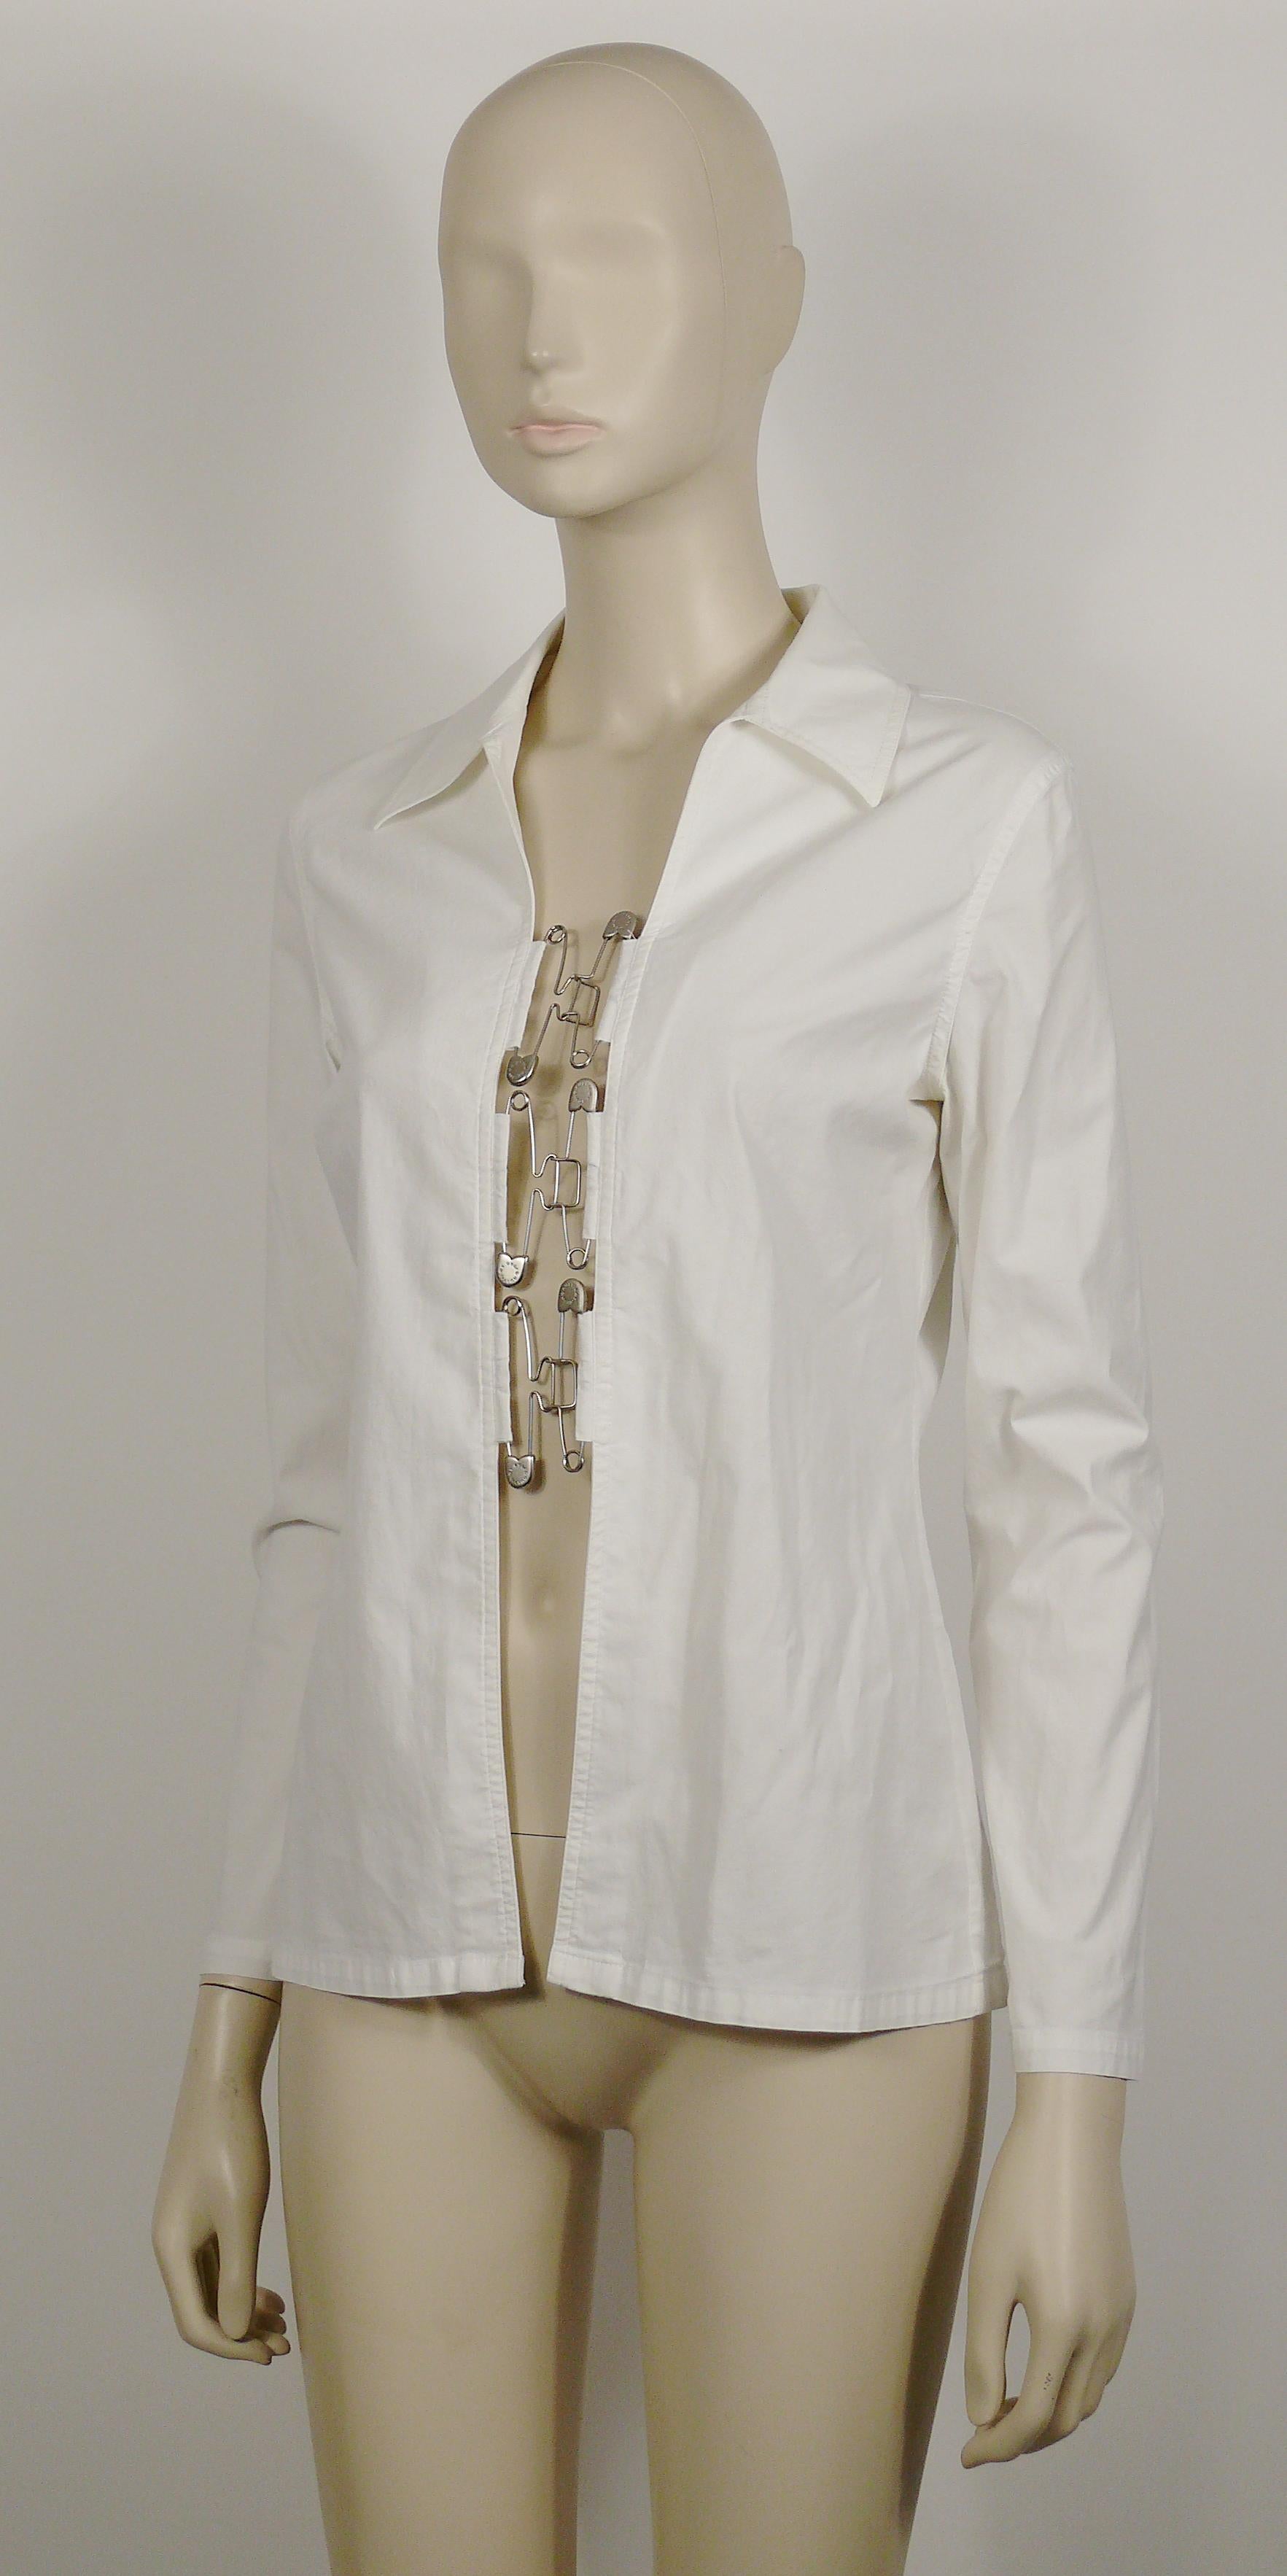 shirt with safety pins